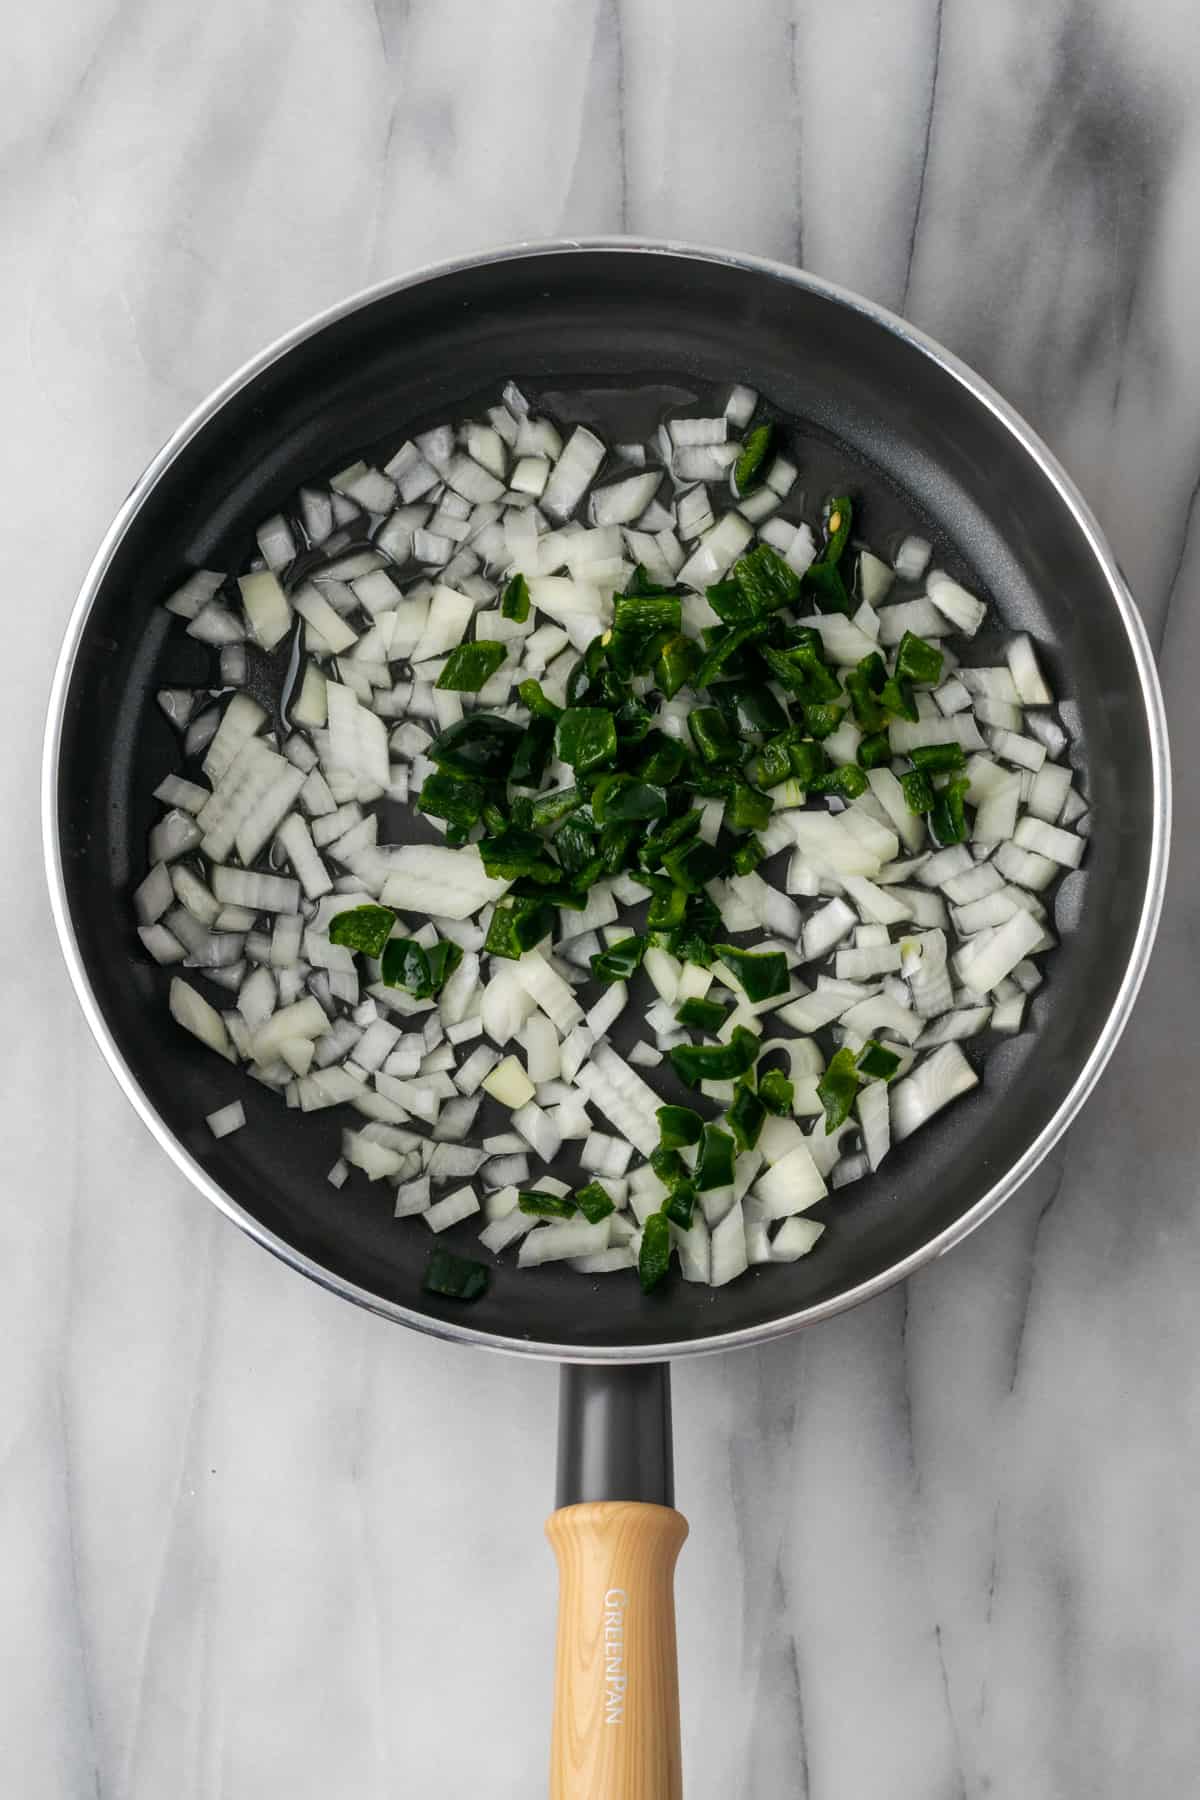 Diced onions and poblano peppers cooking in a nonstick skillet.